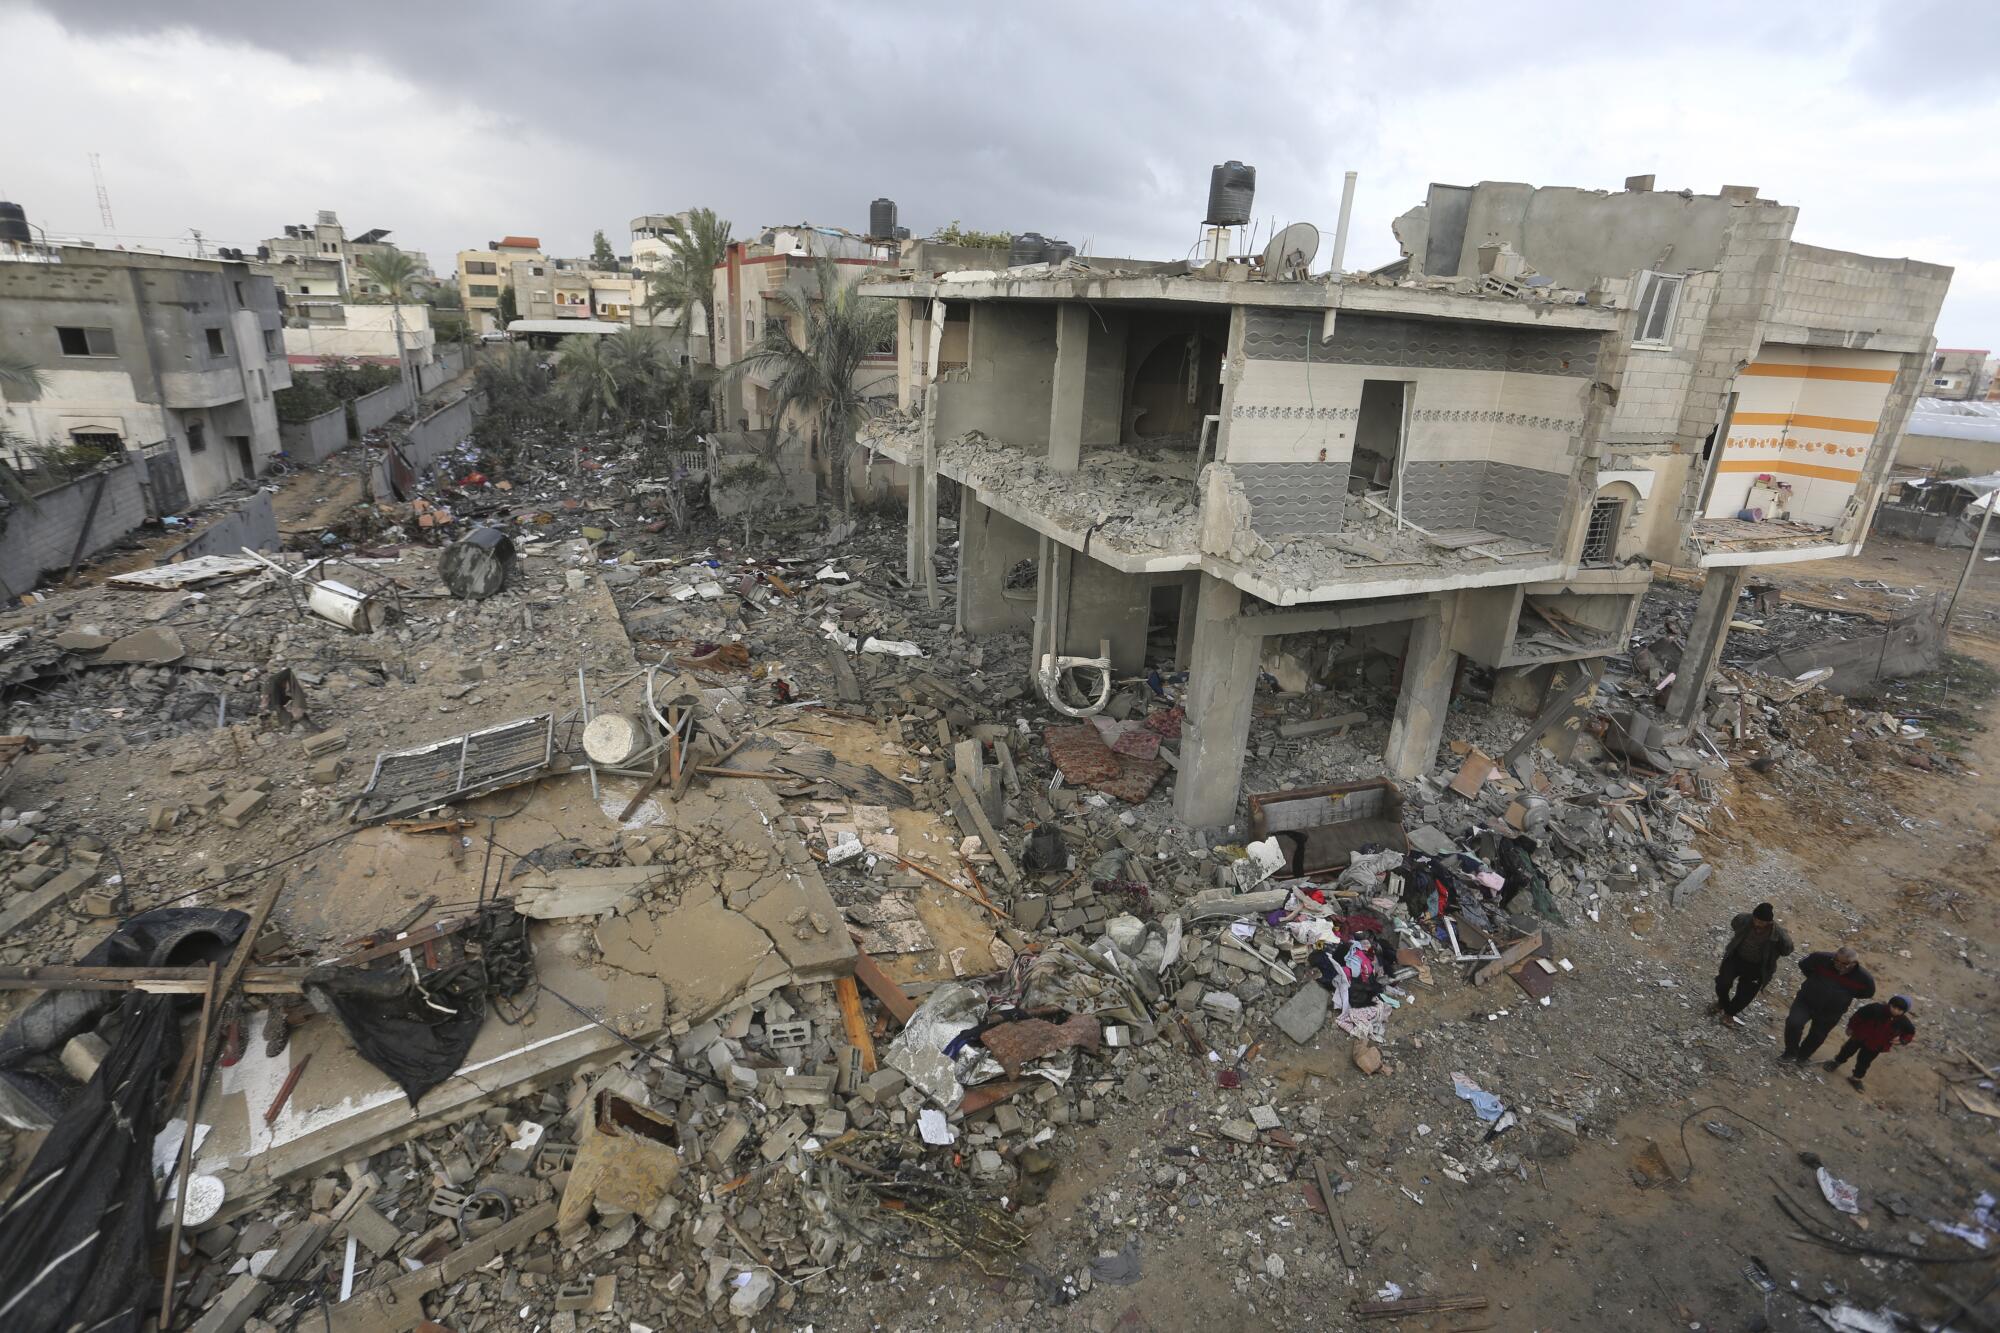 Houses in Ragah, Gaza, destroyed in Israel's bombardment